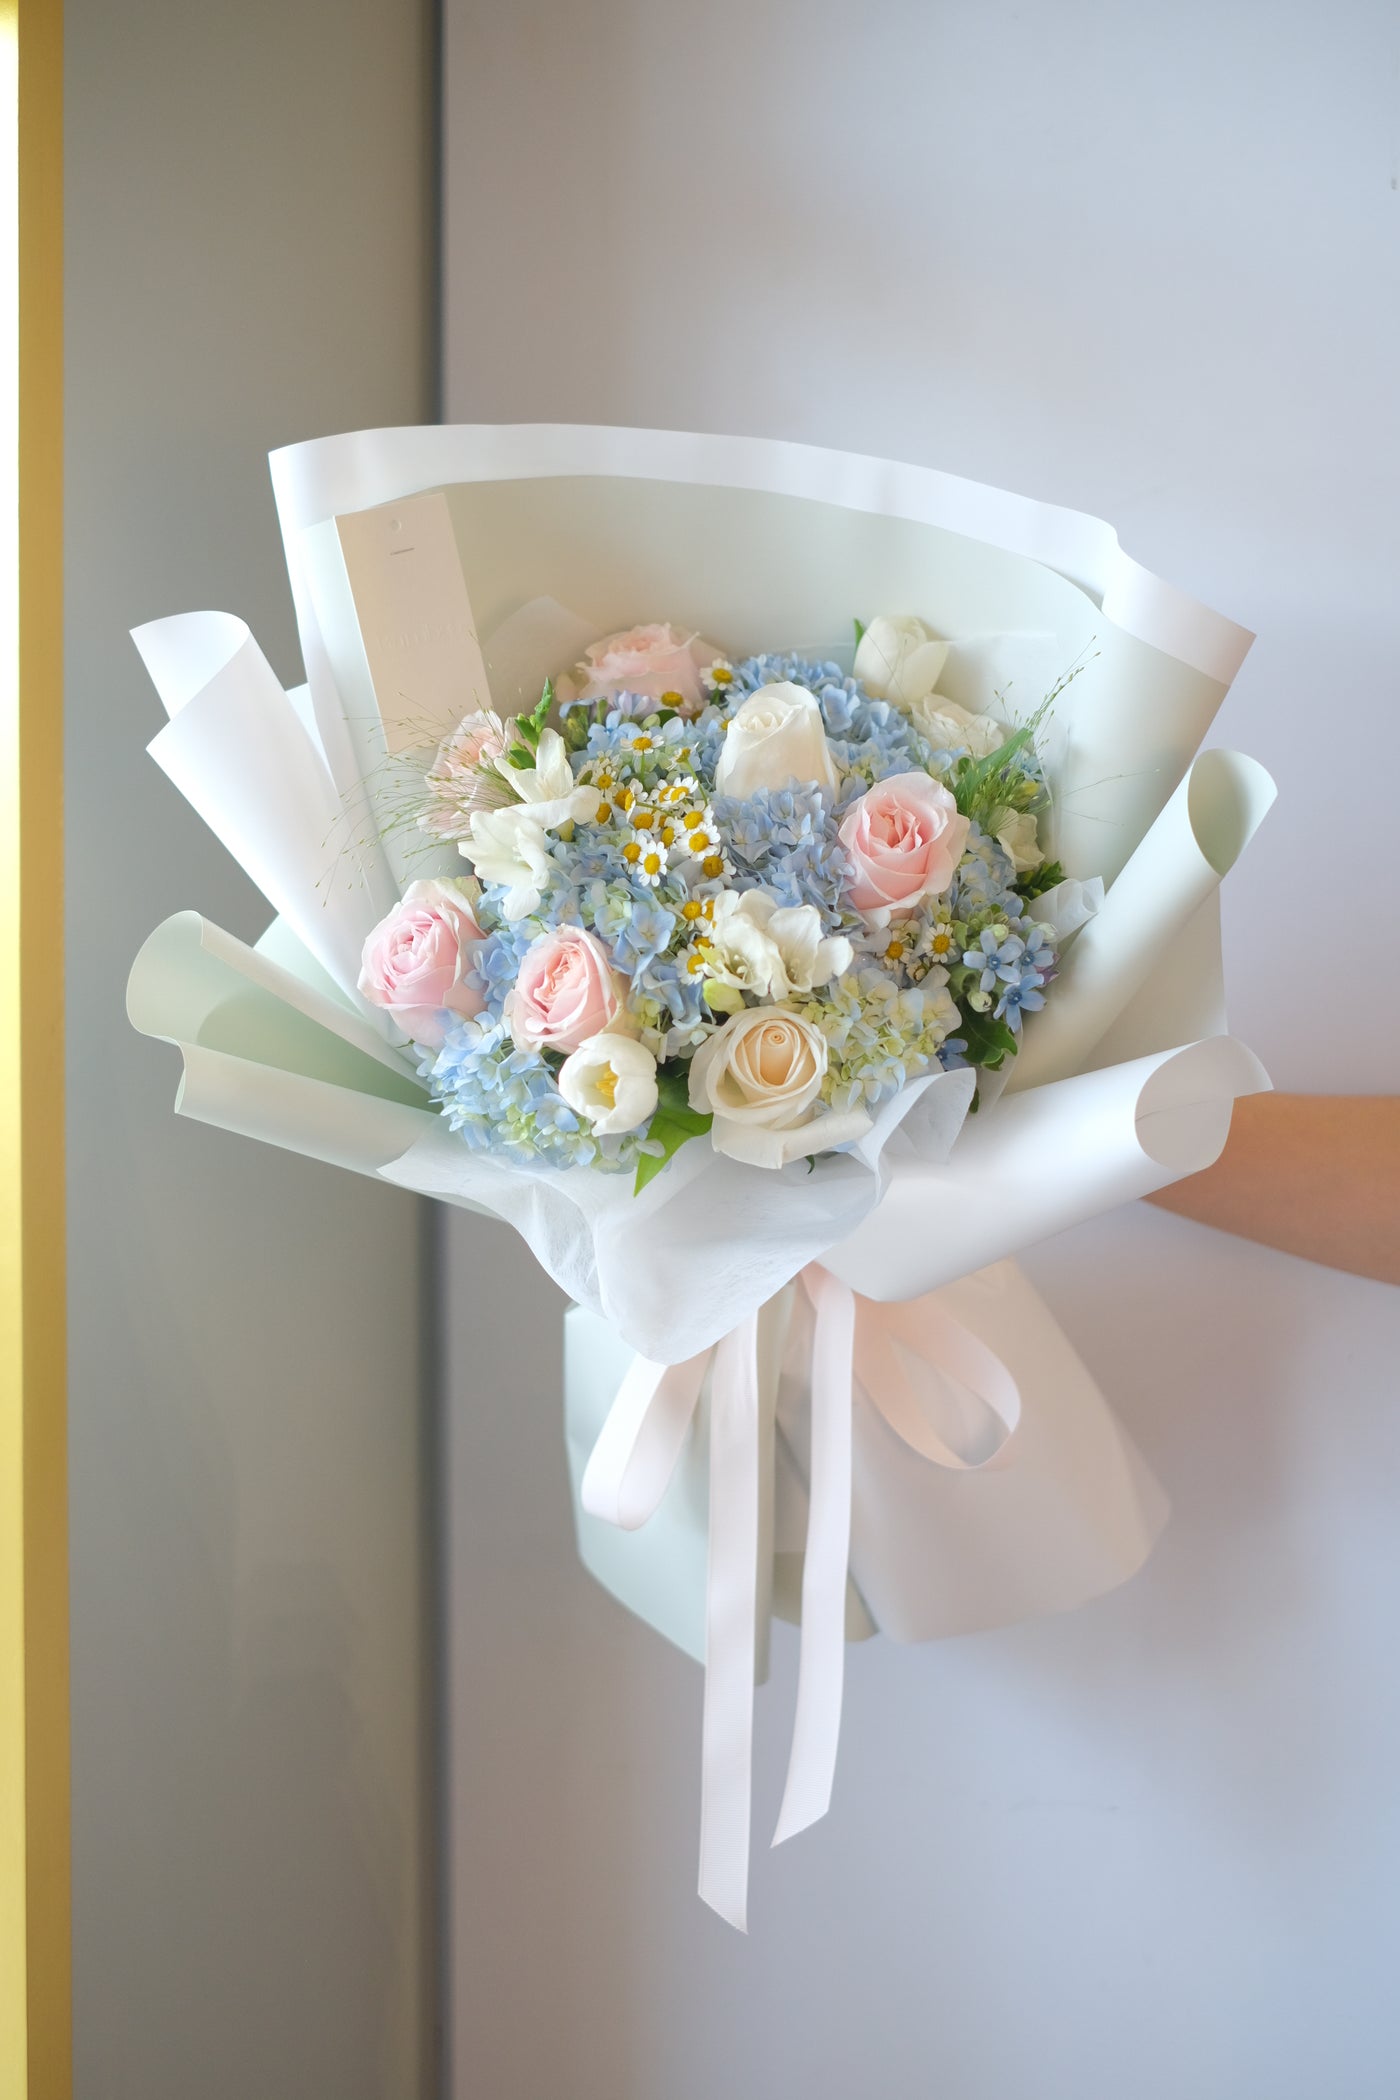 graduation bouquet featuring pastel-coloured roses, cappuccino roses, and more